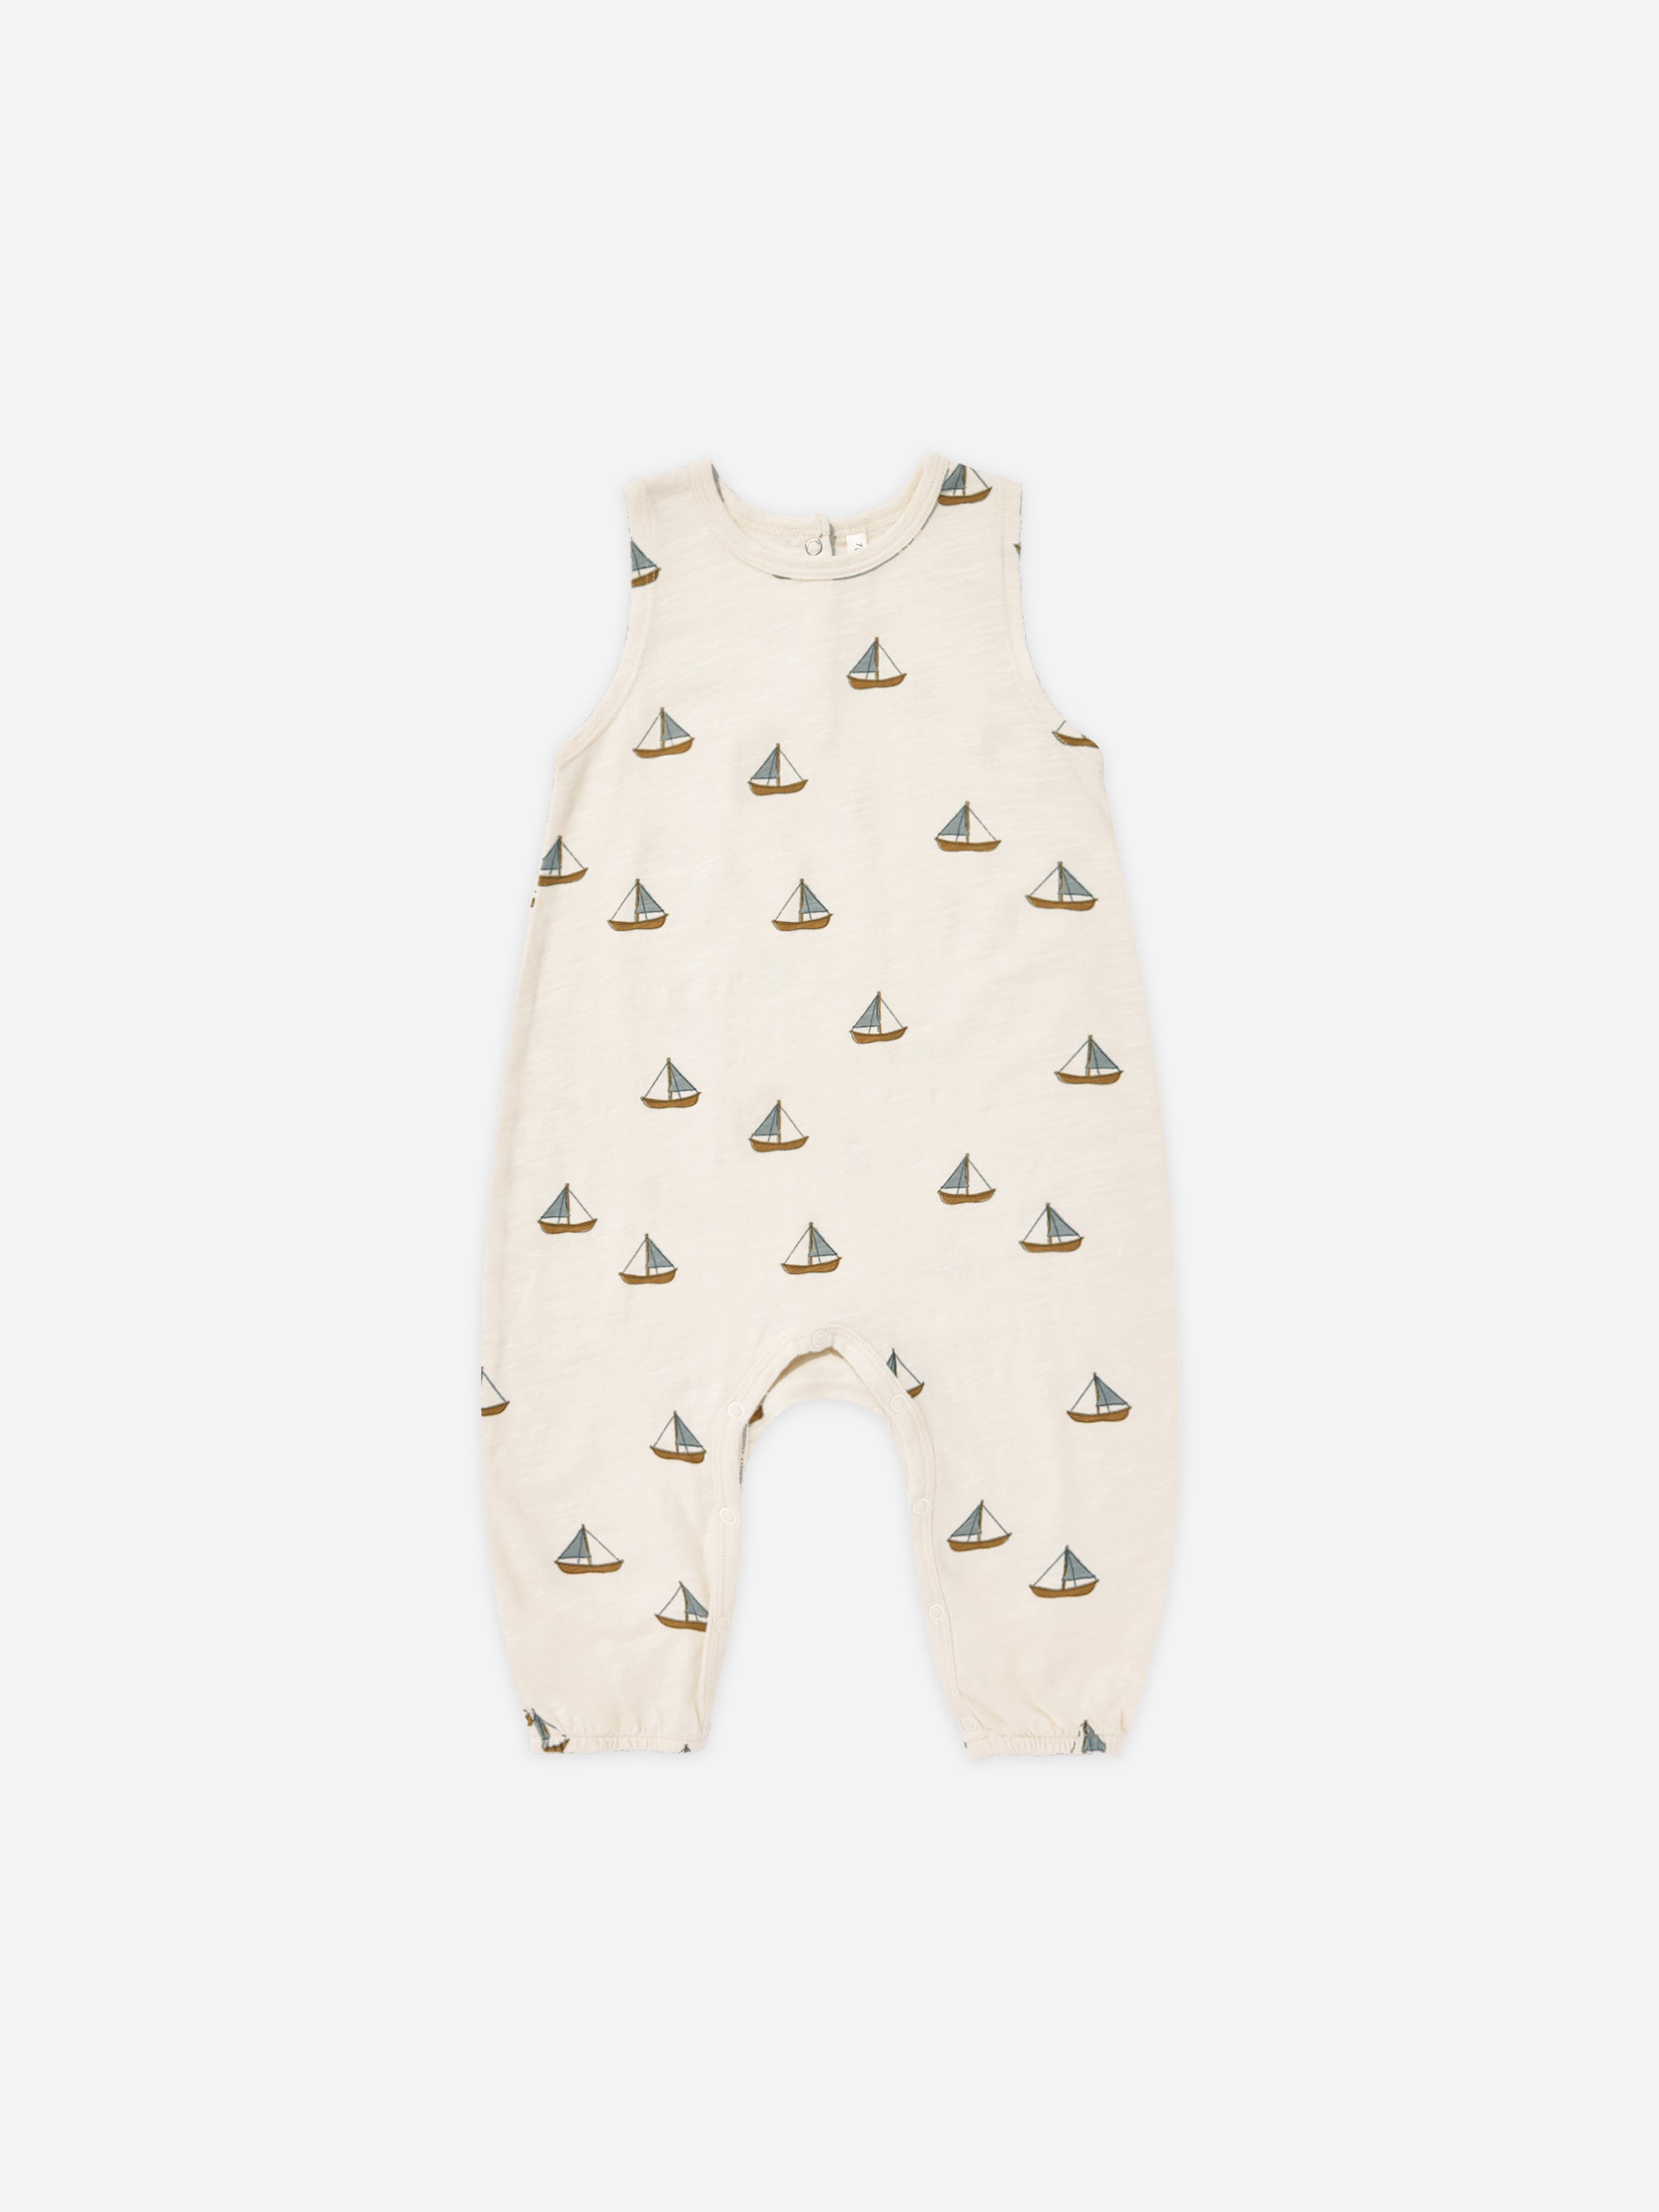 Mills Jumpsuit || Sailboats - Rylee + Cru | Kids Clothes | Trendy Baby Clothes | Modern Infant Outfits |